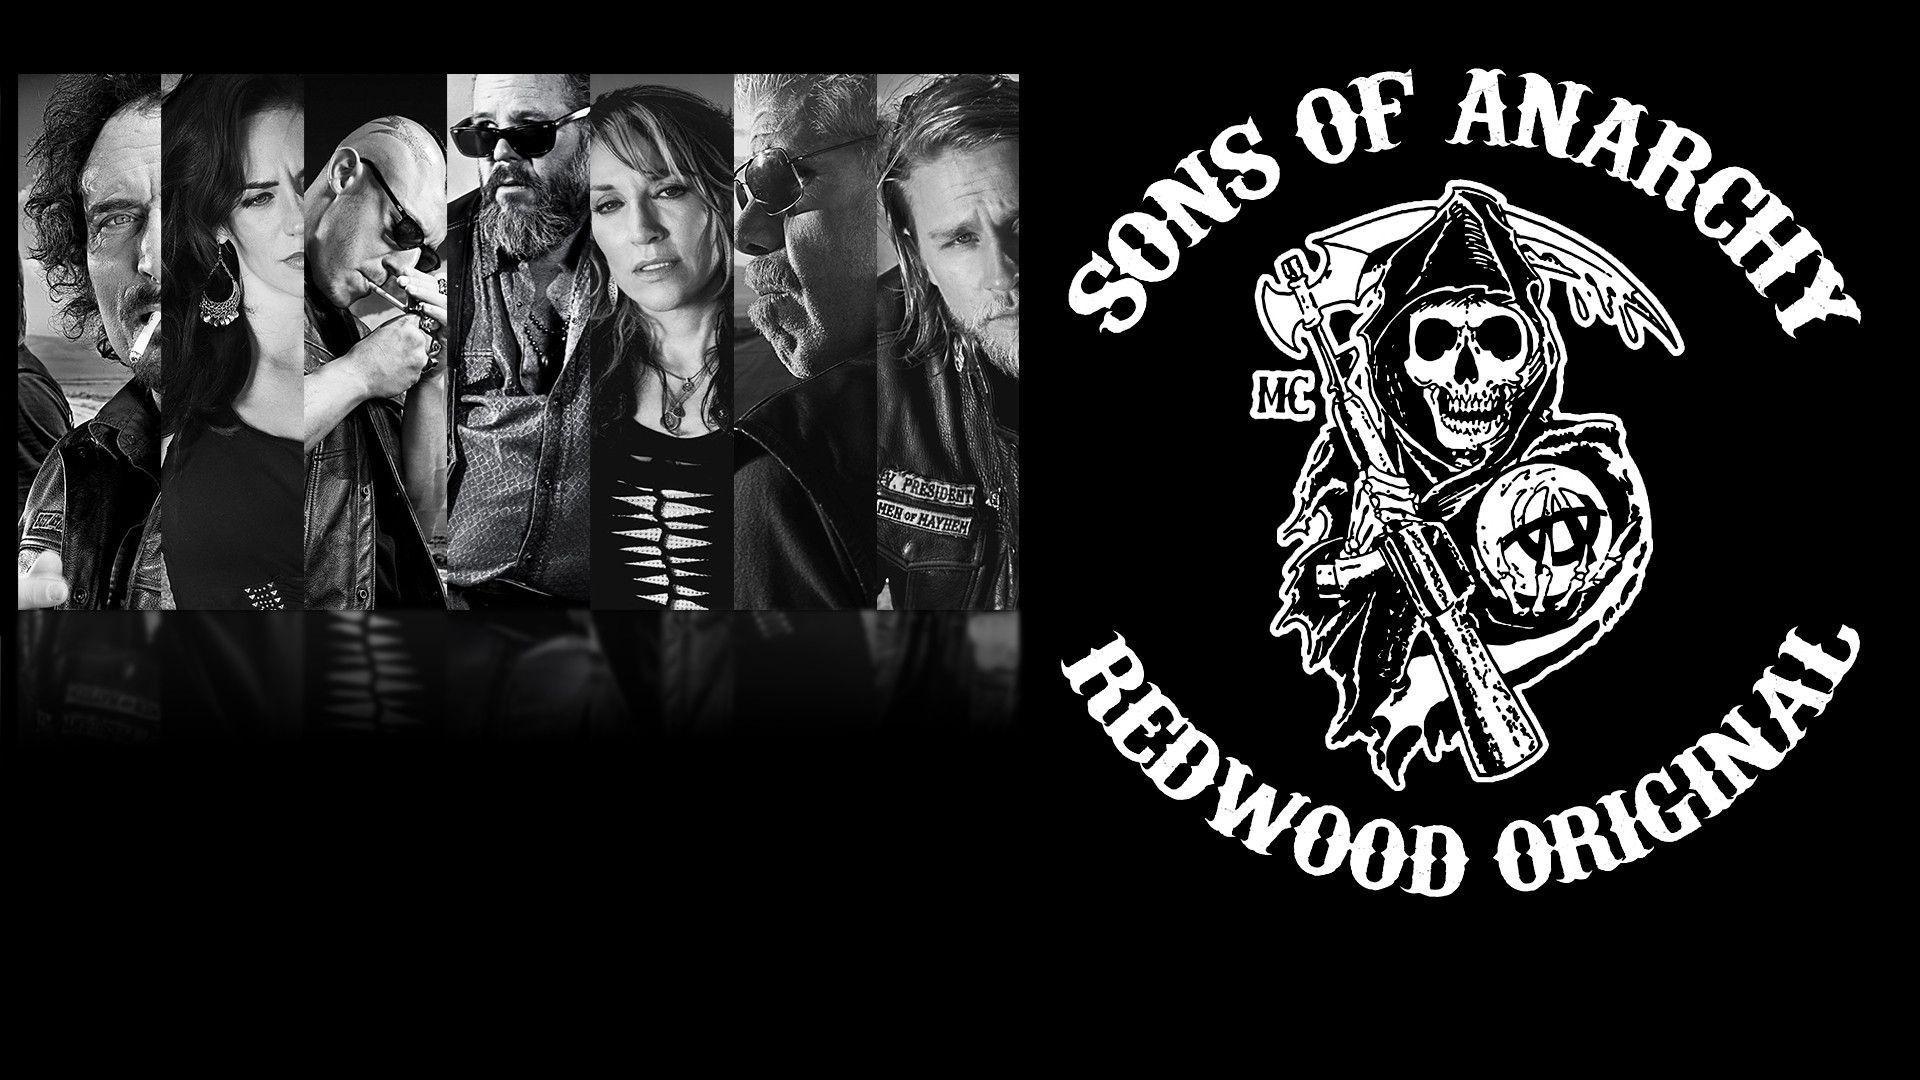 More Like Sons of Anarchy wallpaper 1920x1080